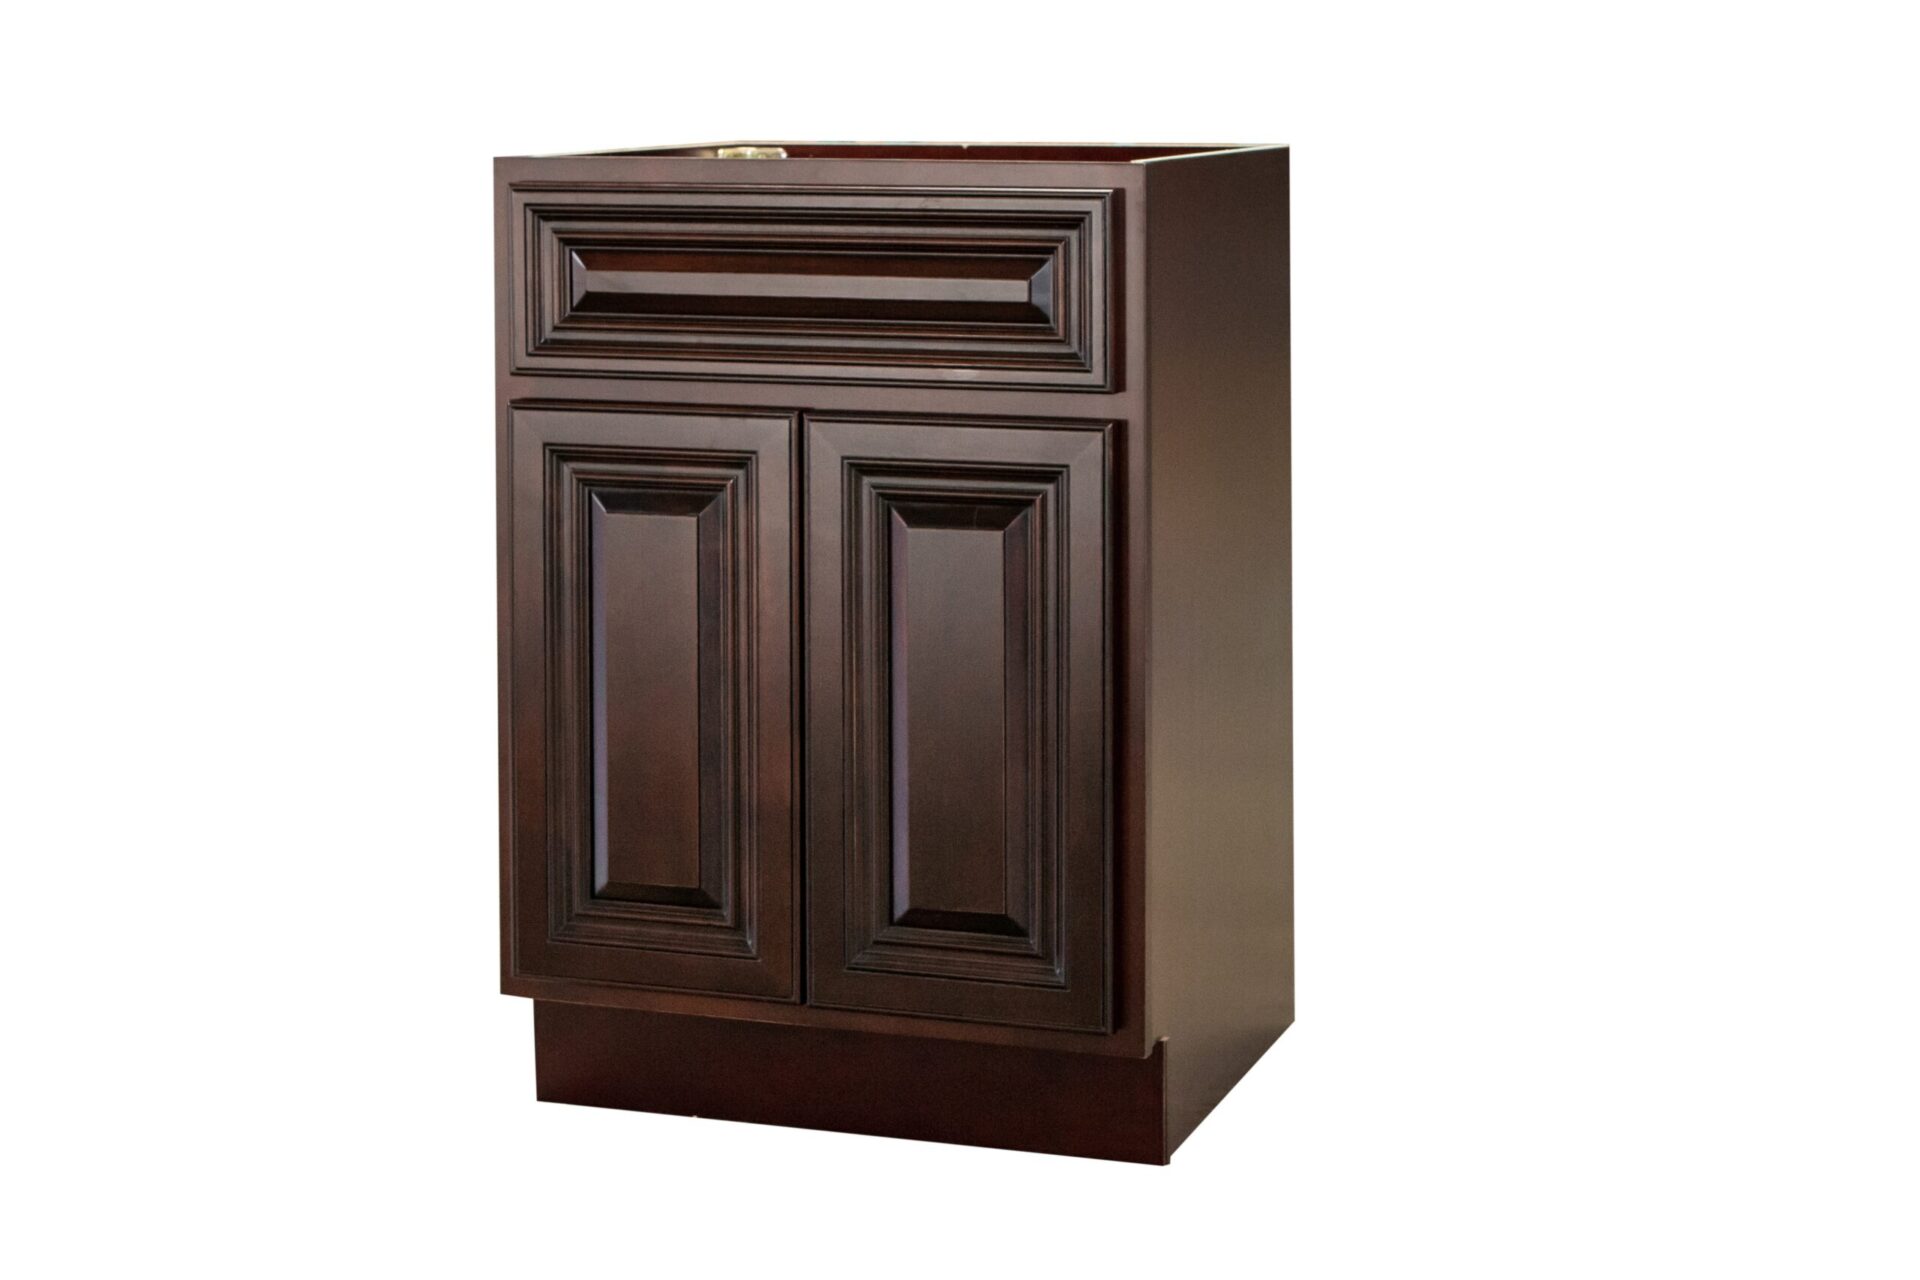 New Cabinet Doors N More Discount Code for Simple Design